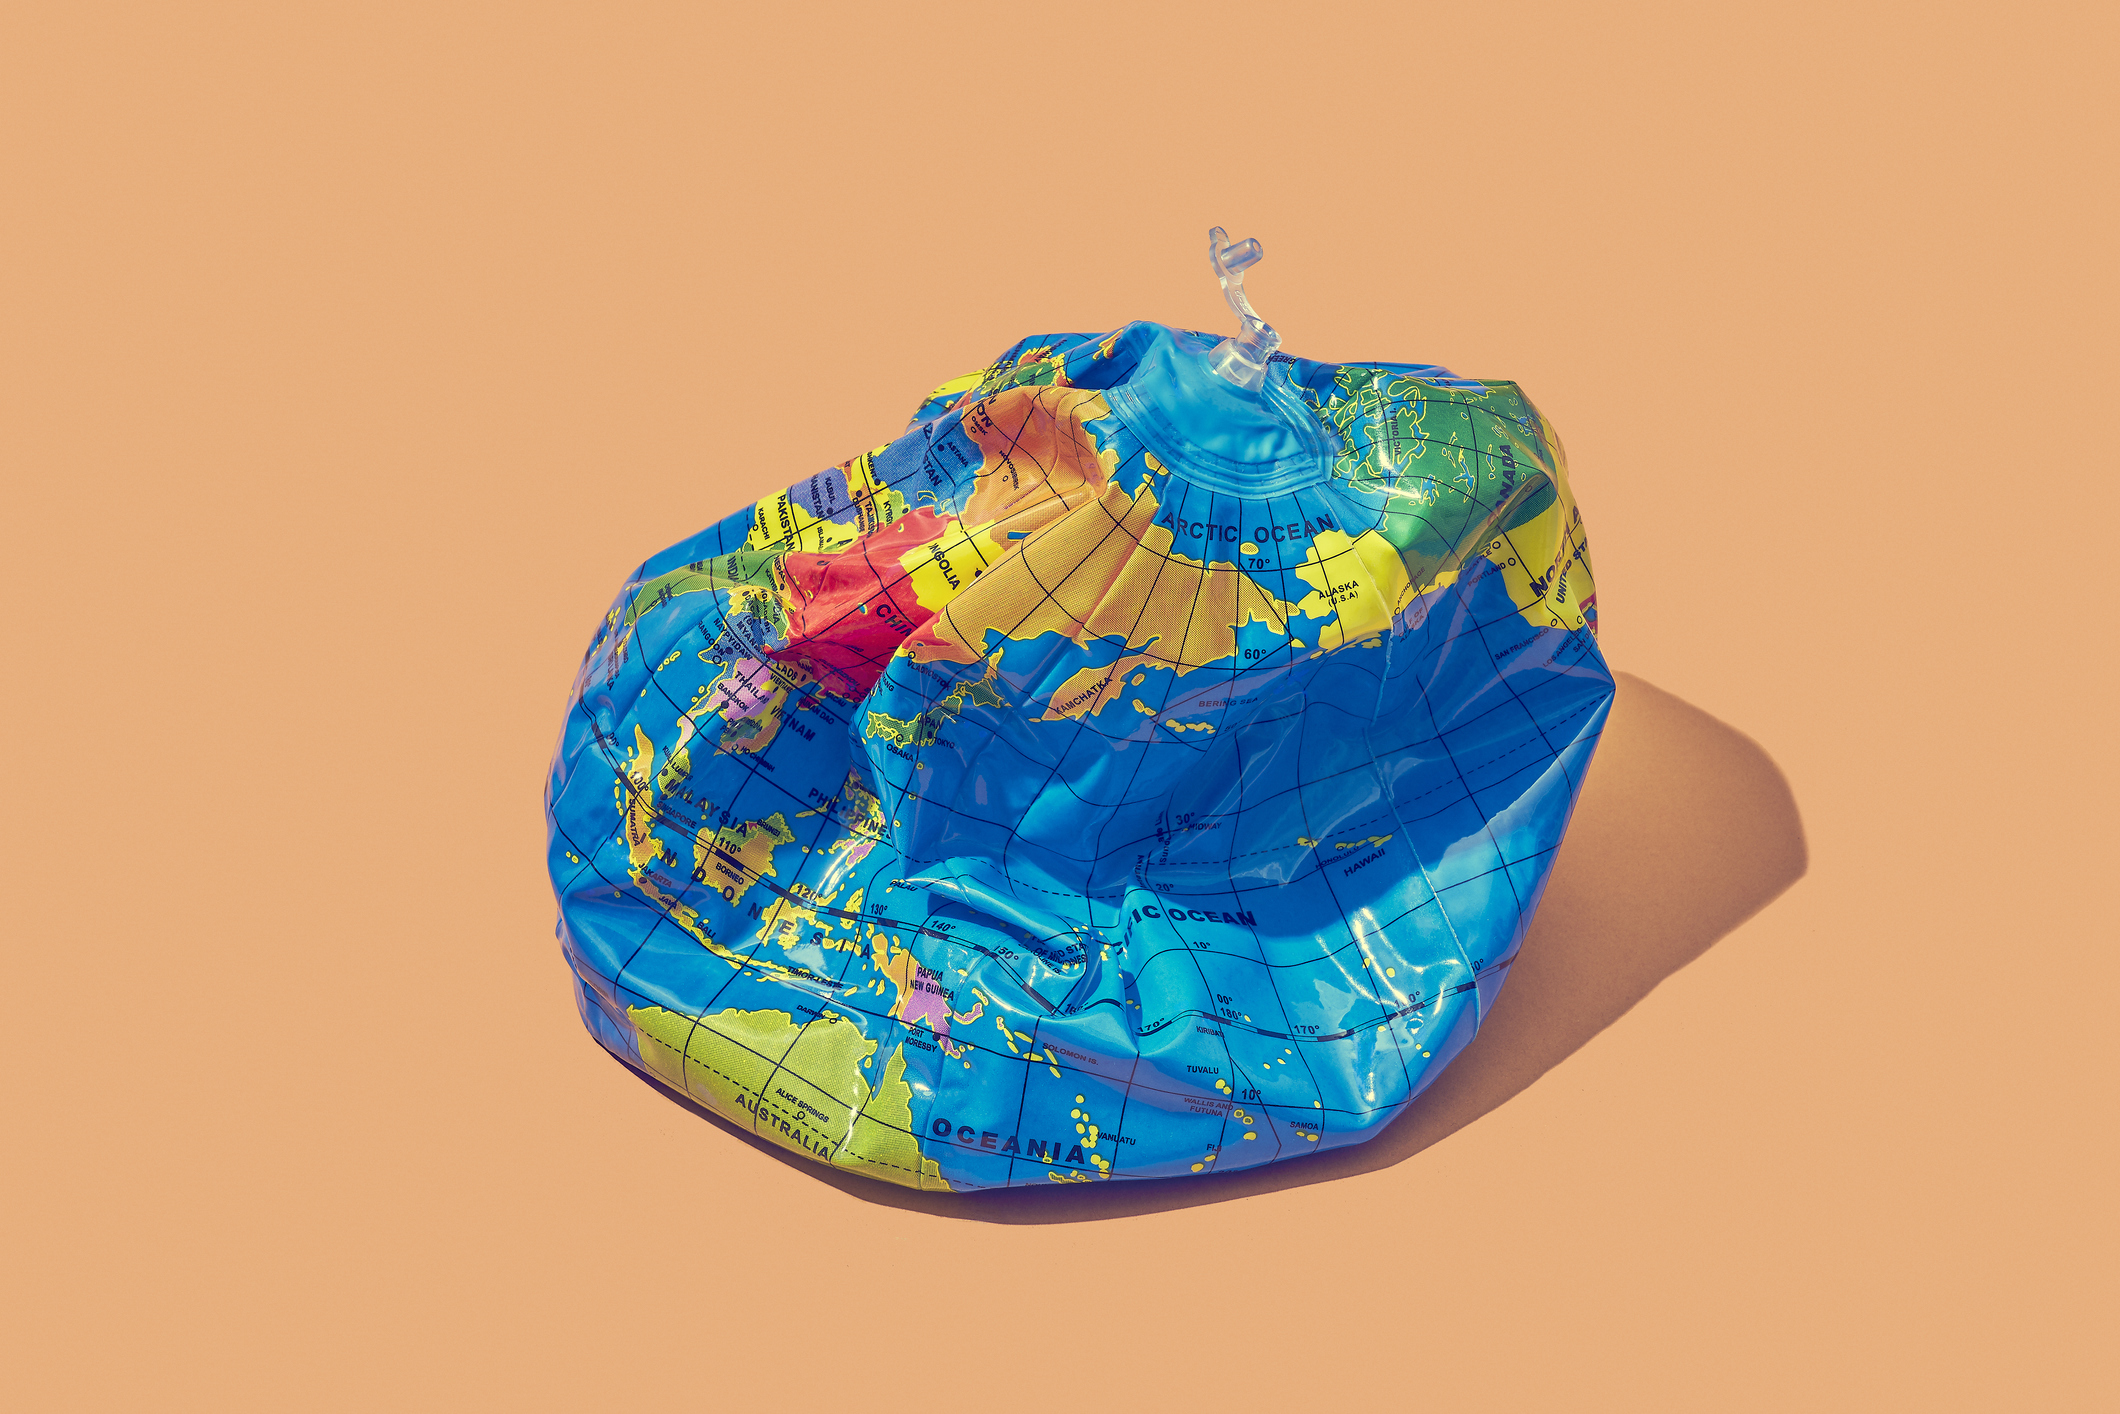 Deflated earth placed on a colored background